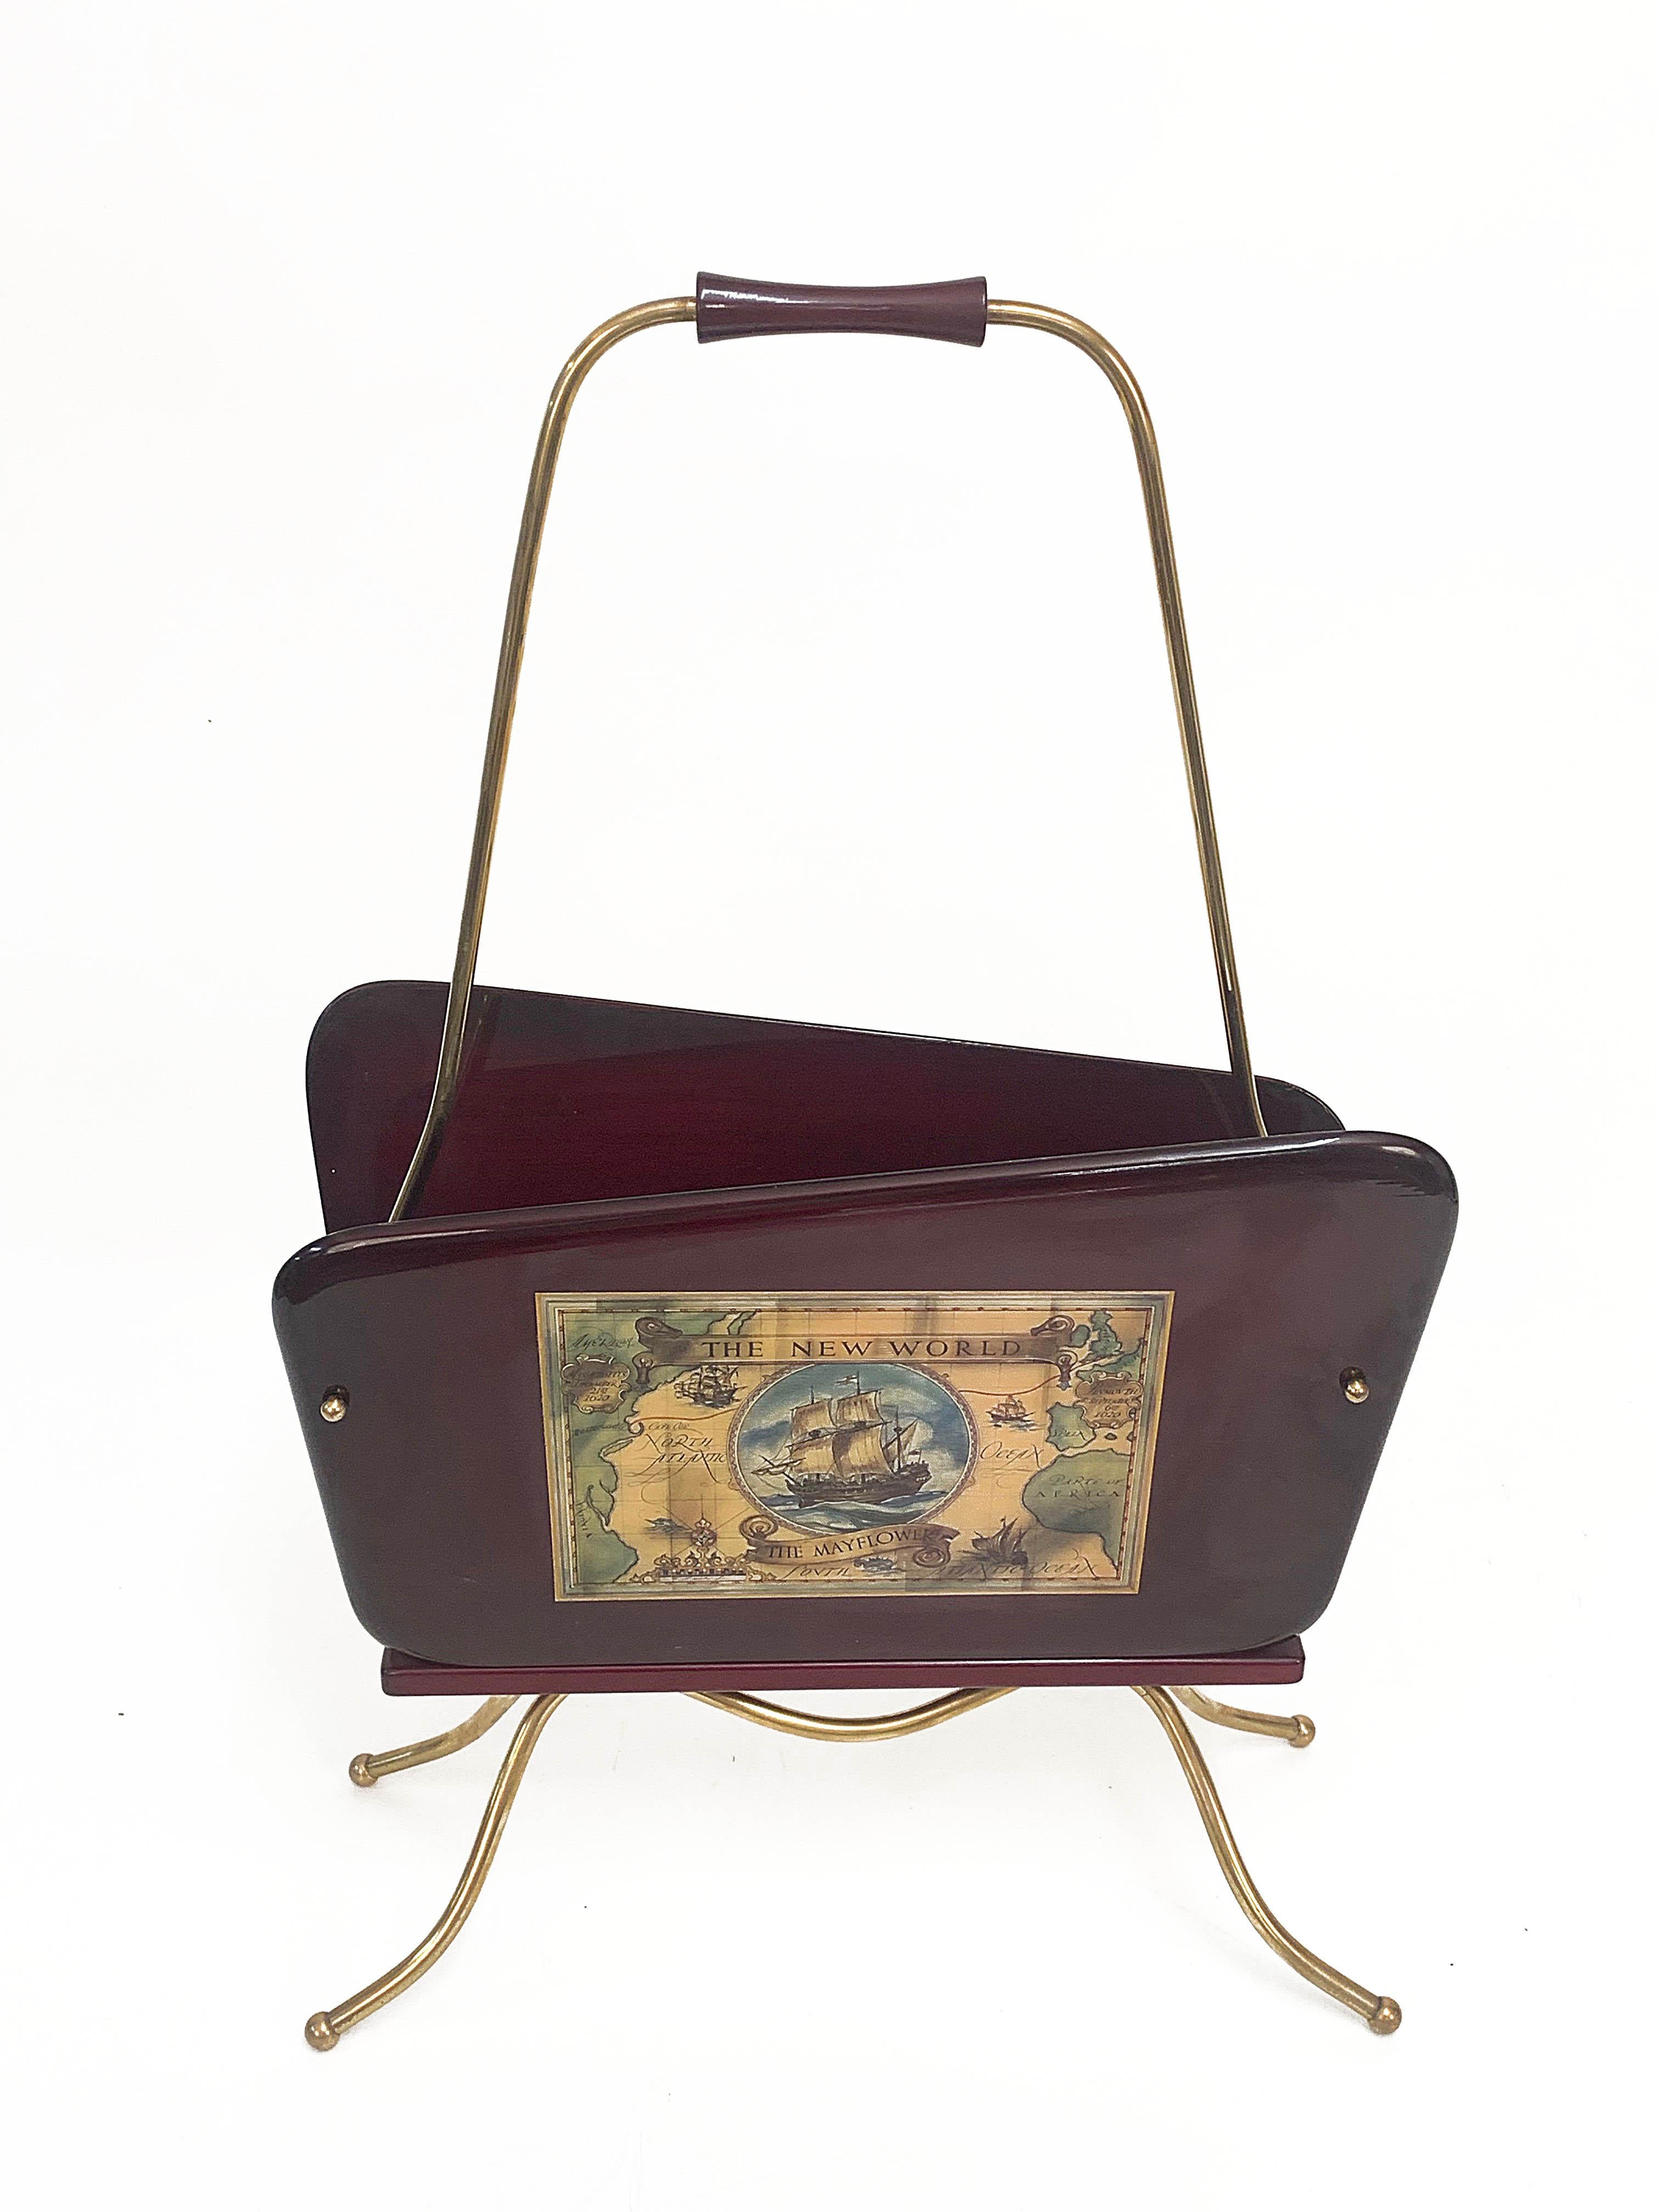 Gio Ponti Midcentury Wood and Brass Italian Magazine Rack with Handle, 1950s For Sale 5